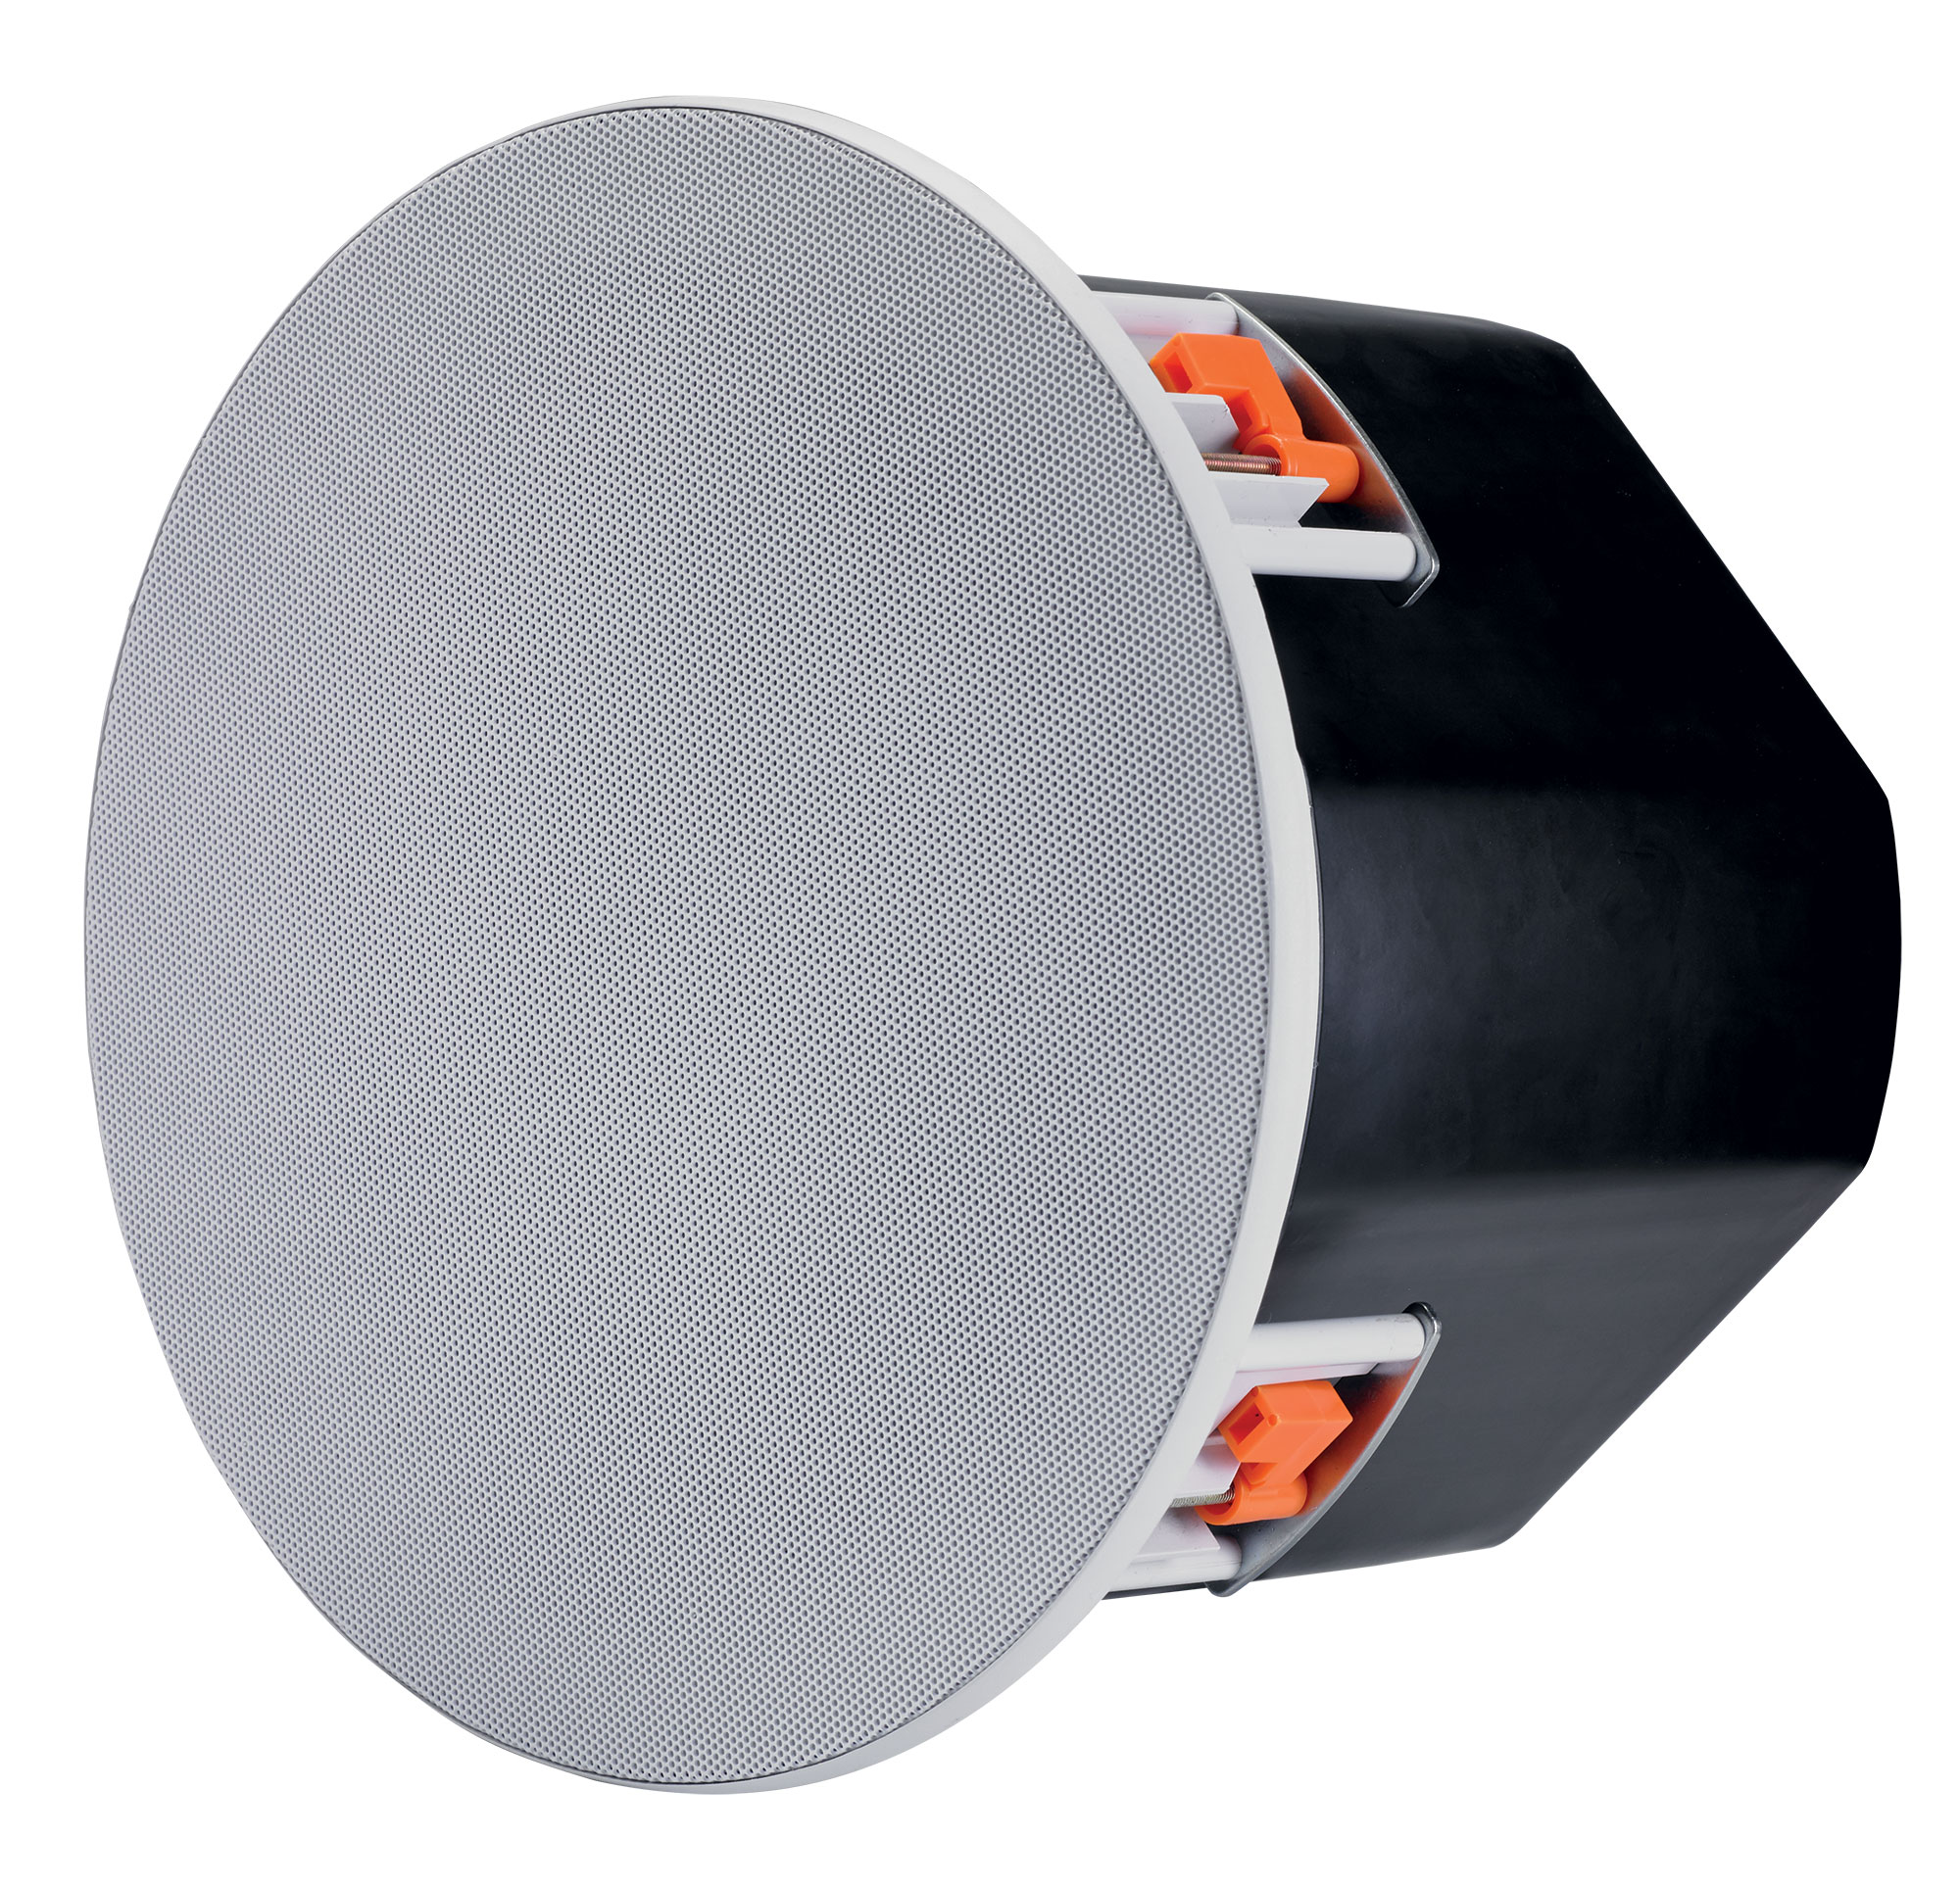 Ceiling subwoofer 20/40/60W at 100V and 60W at 8 ohms